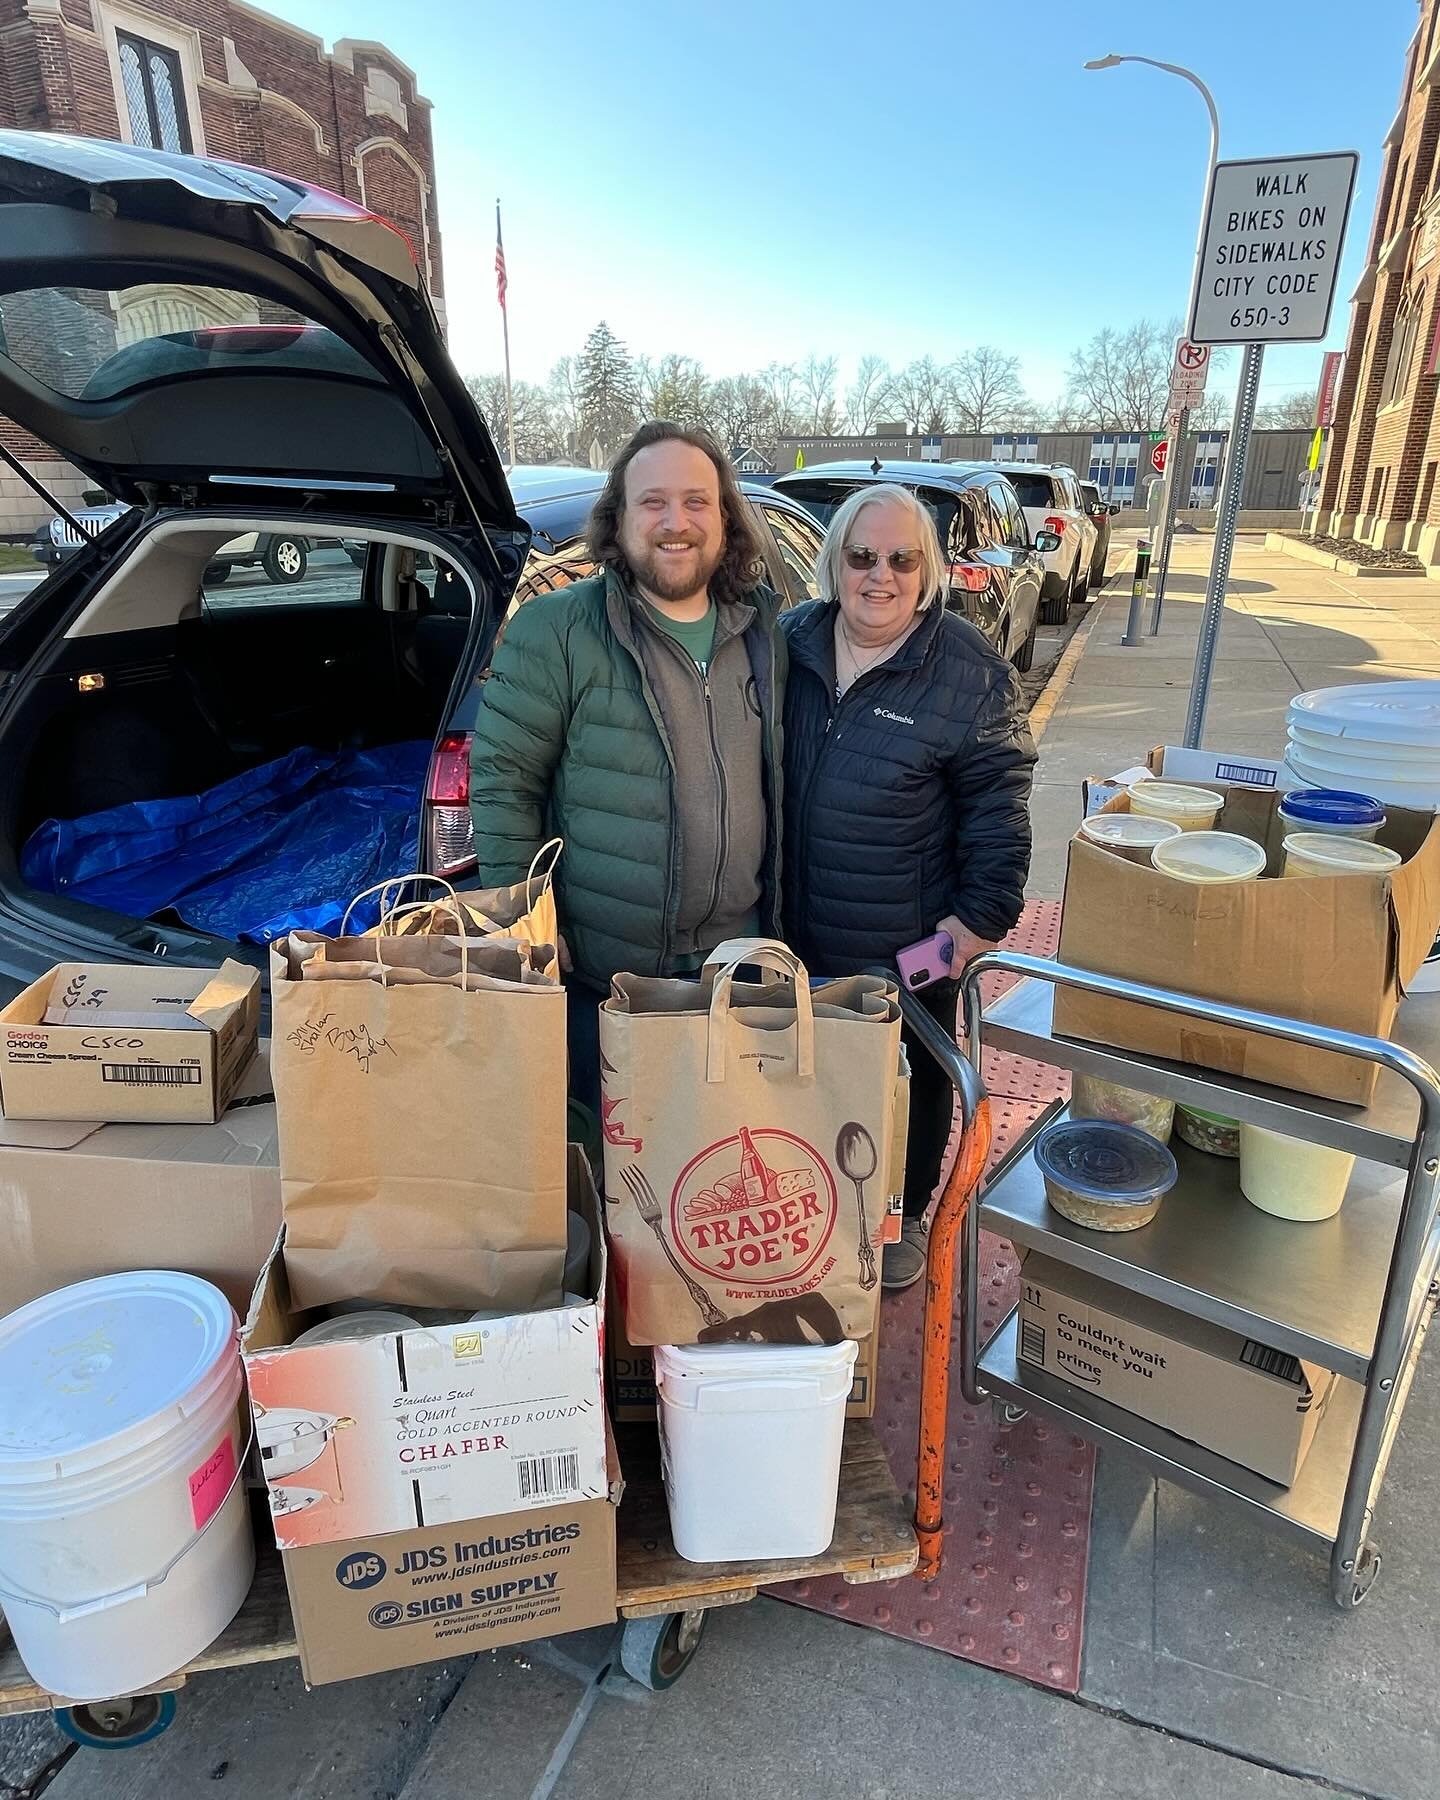 Thank you @templeshirshalommi the people  who go to  Royal Oak First United Methodist Church for their food will have plenty of delicious soup. Thank you for helping us waste less and feed more. #chickensoup #foodwaste #wastelessfeedmore #foodwastepr